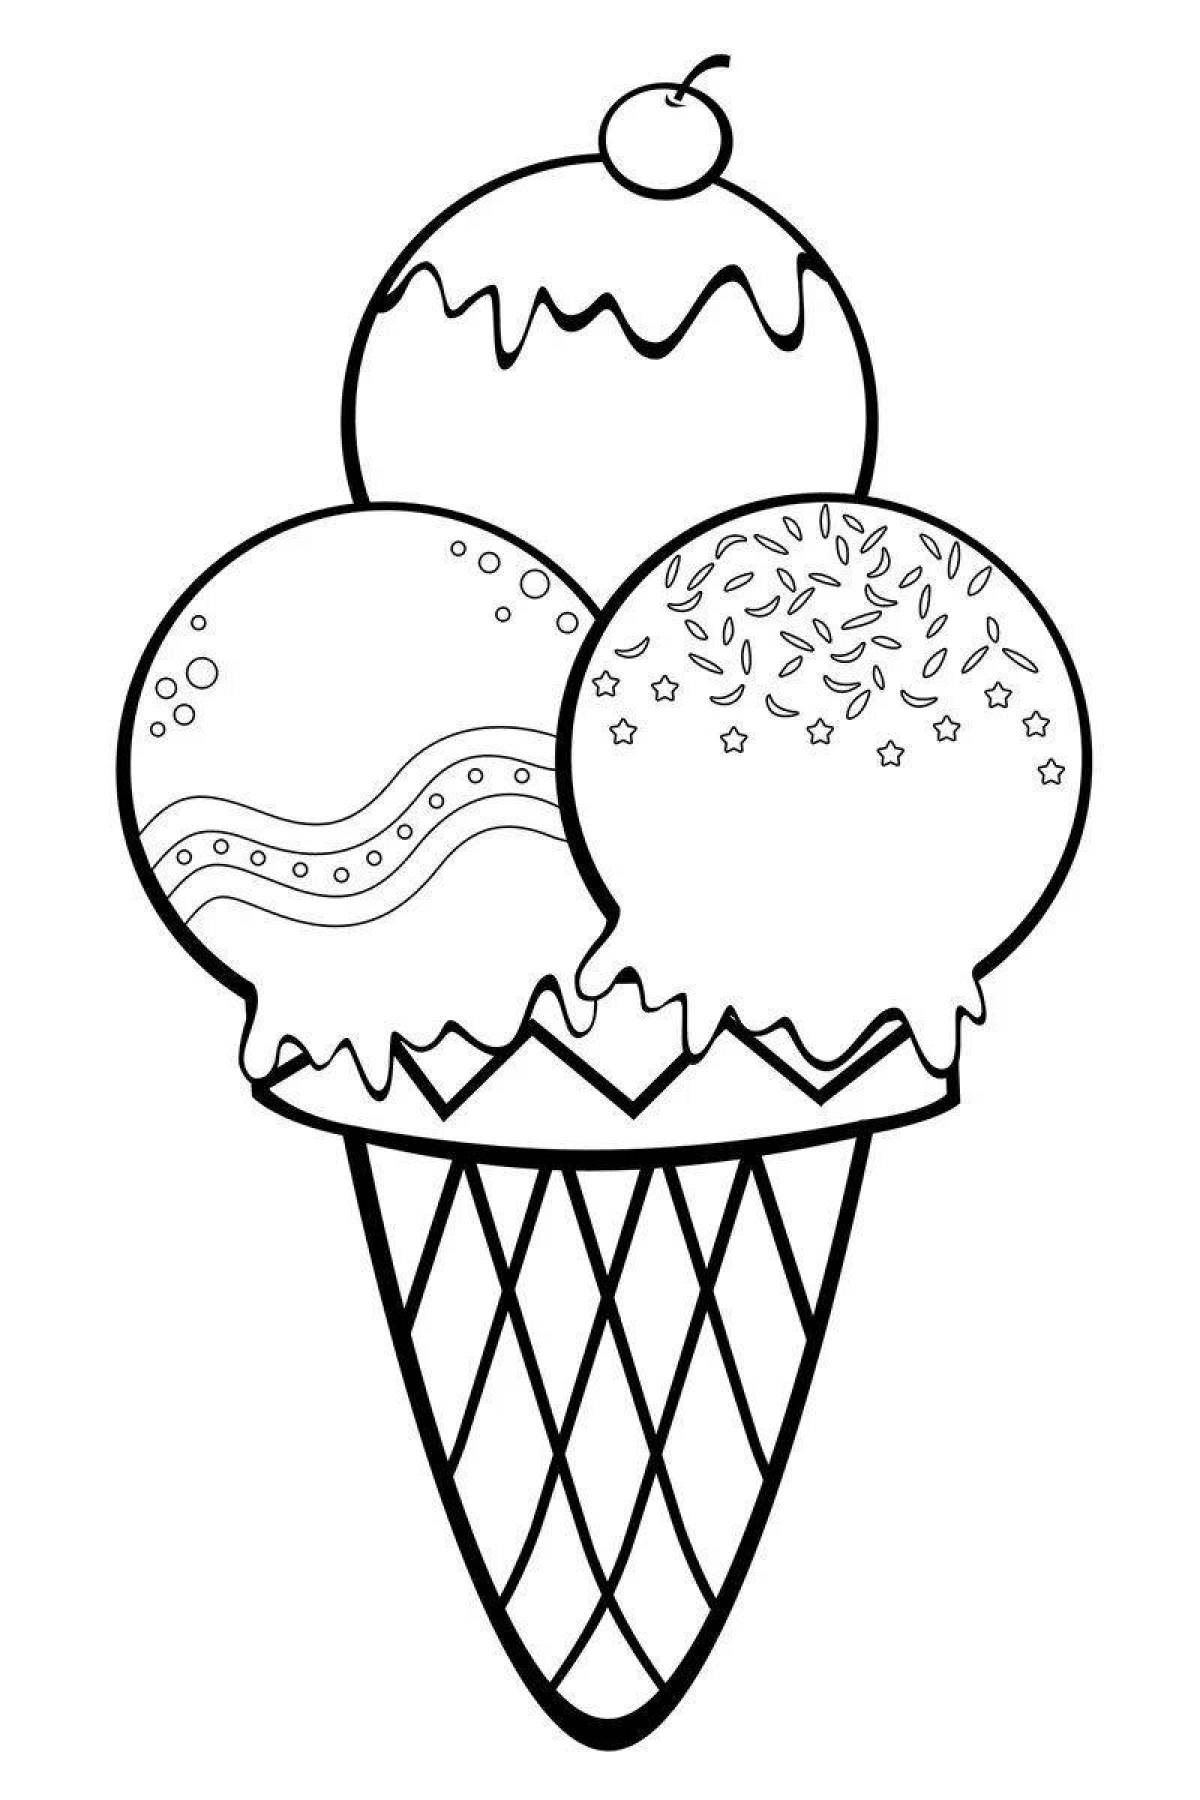 Sparkling sweets coloring book for girls